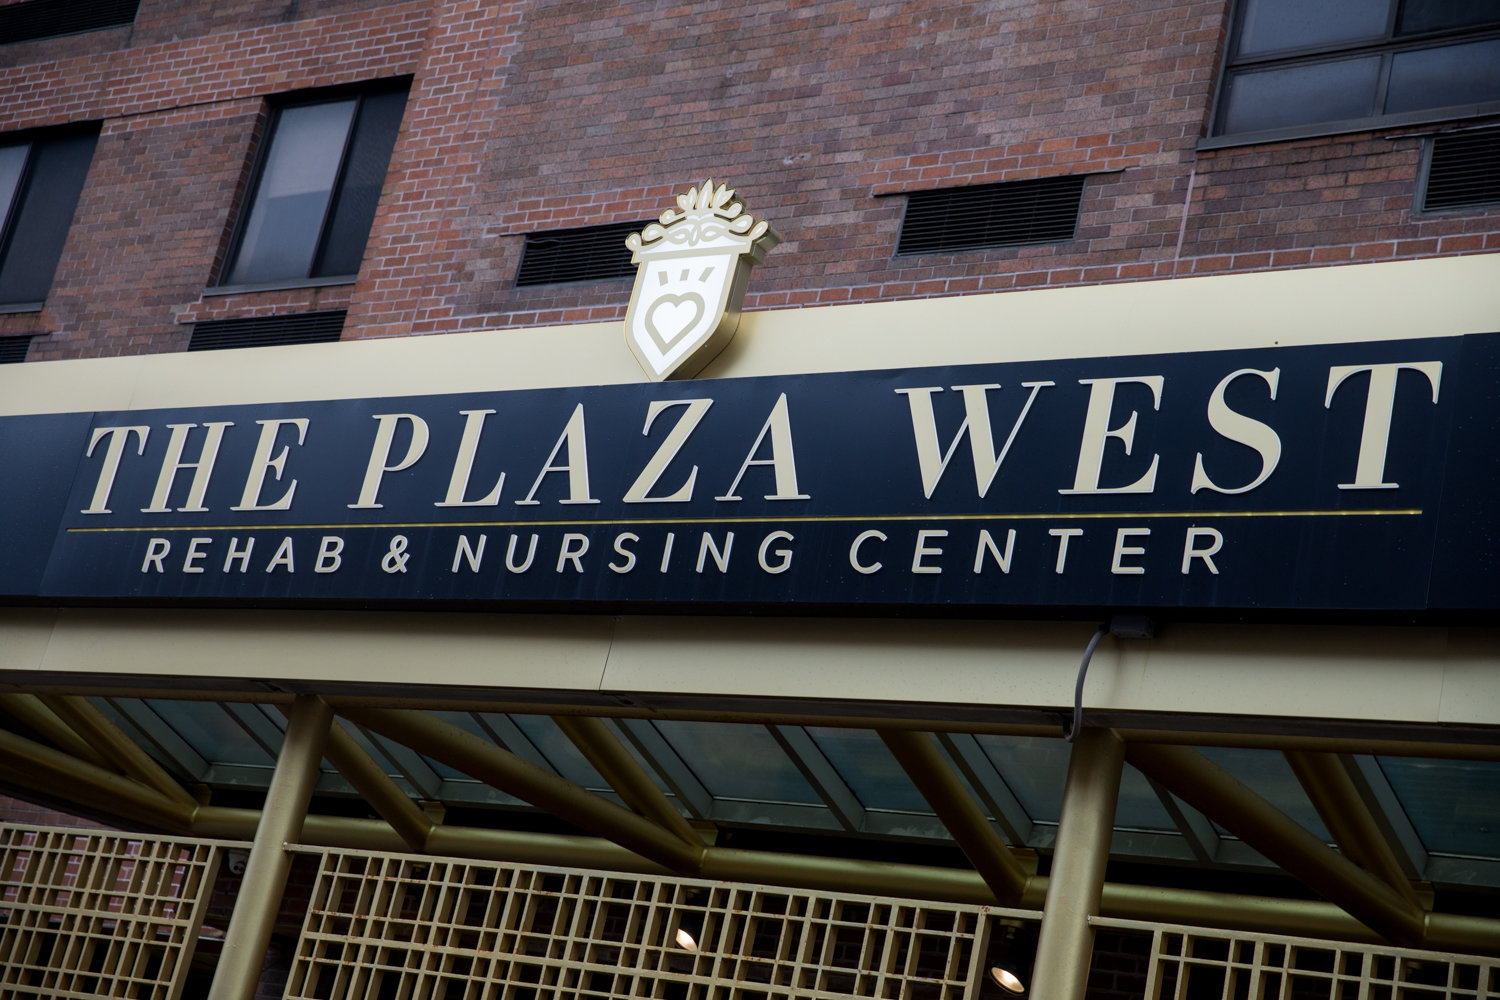 The Plaza Rehabilitation and Nursing Center on Kingsbridge Road leads all Bronx nursing homes when it comes to COVID-19-related deaths on-site, with 58. Another local nursing home owned by the same company — Citadel Rehabilitation and Nursing Center on Cannon Place — has had 50 deaths.